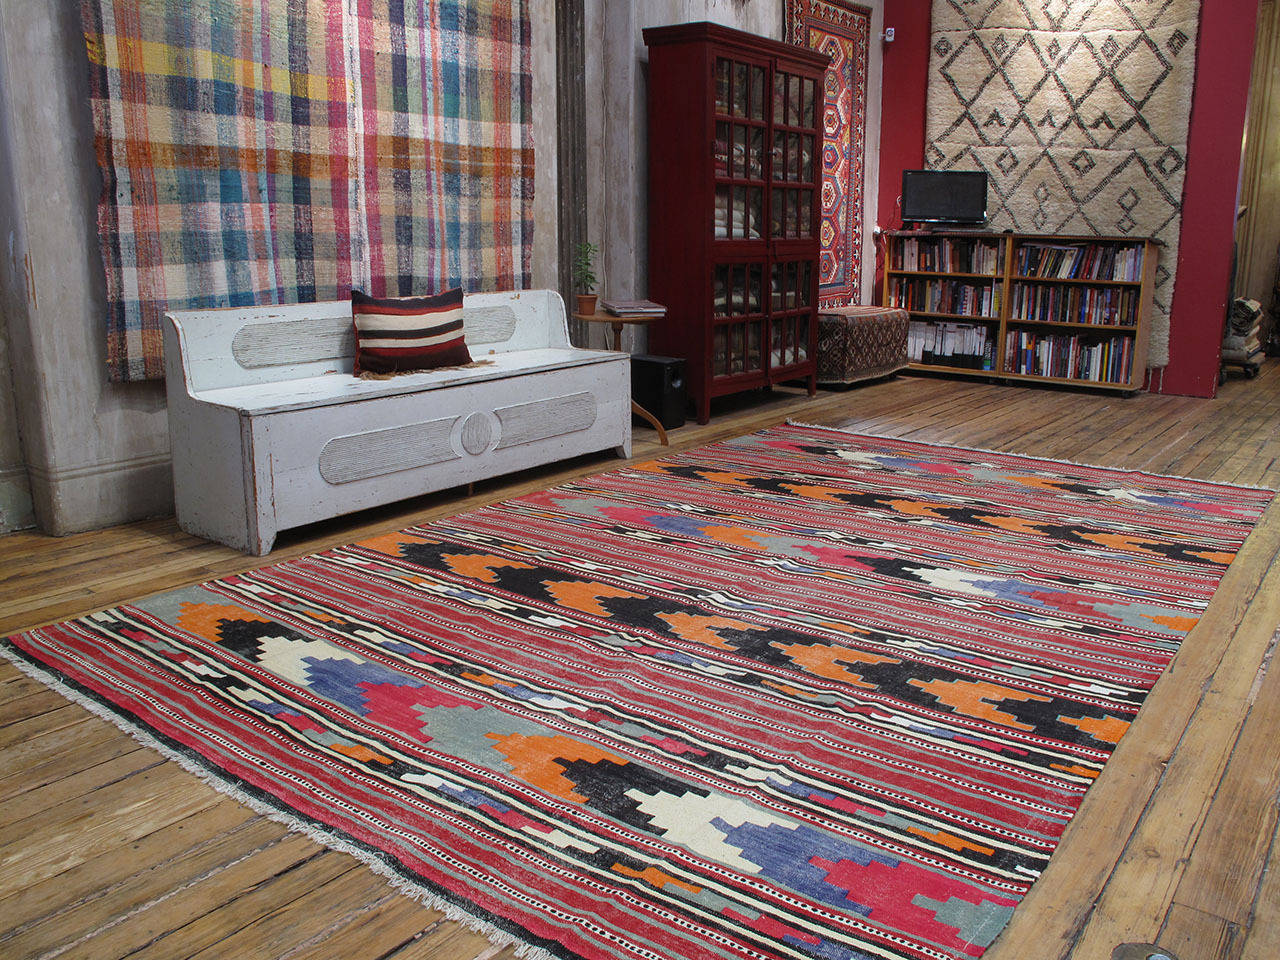 Mihalic Kilim rug. A large tribal flat-weave rug from Northwestern Turkey featuring a banded design that is usually seen in smaller kilims. This rug is in an unusually large size.